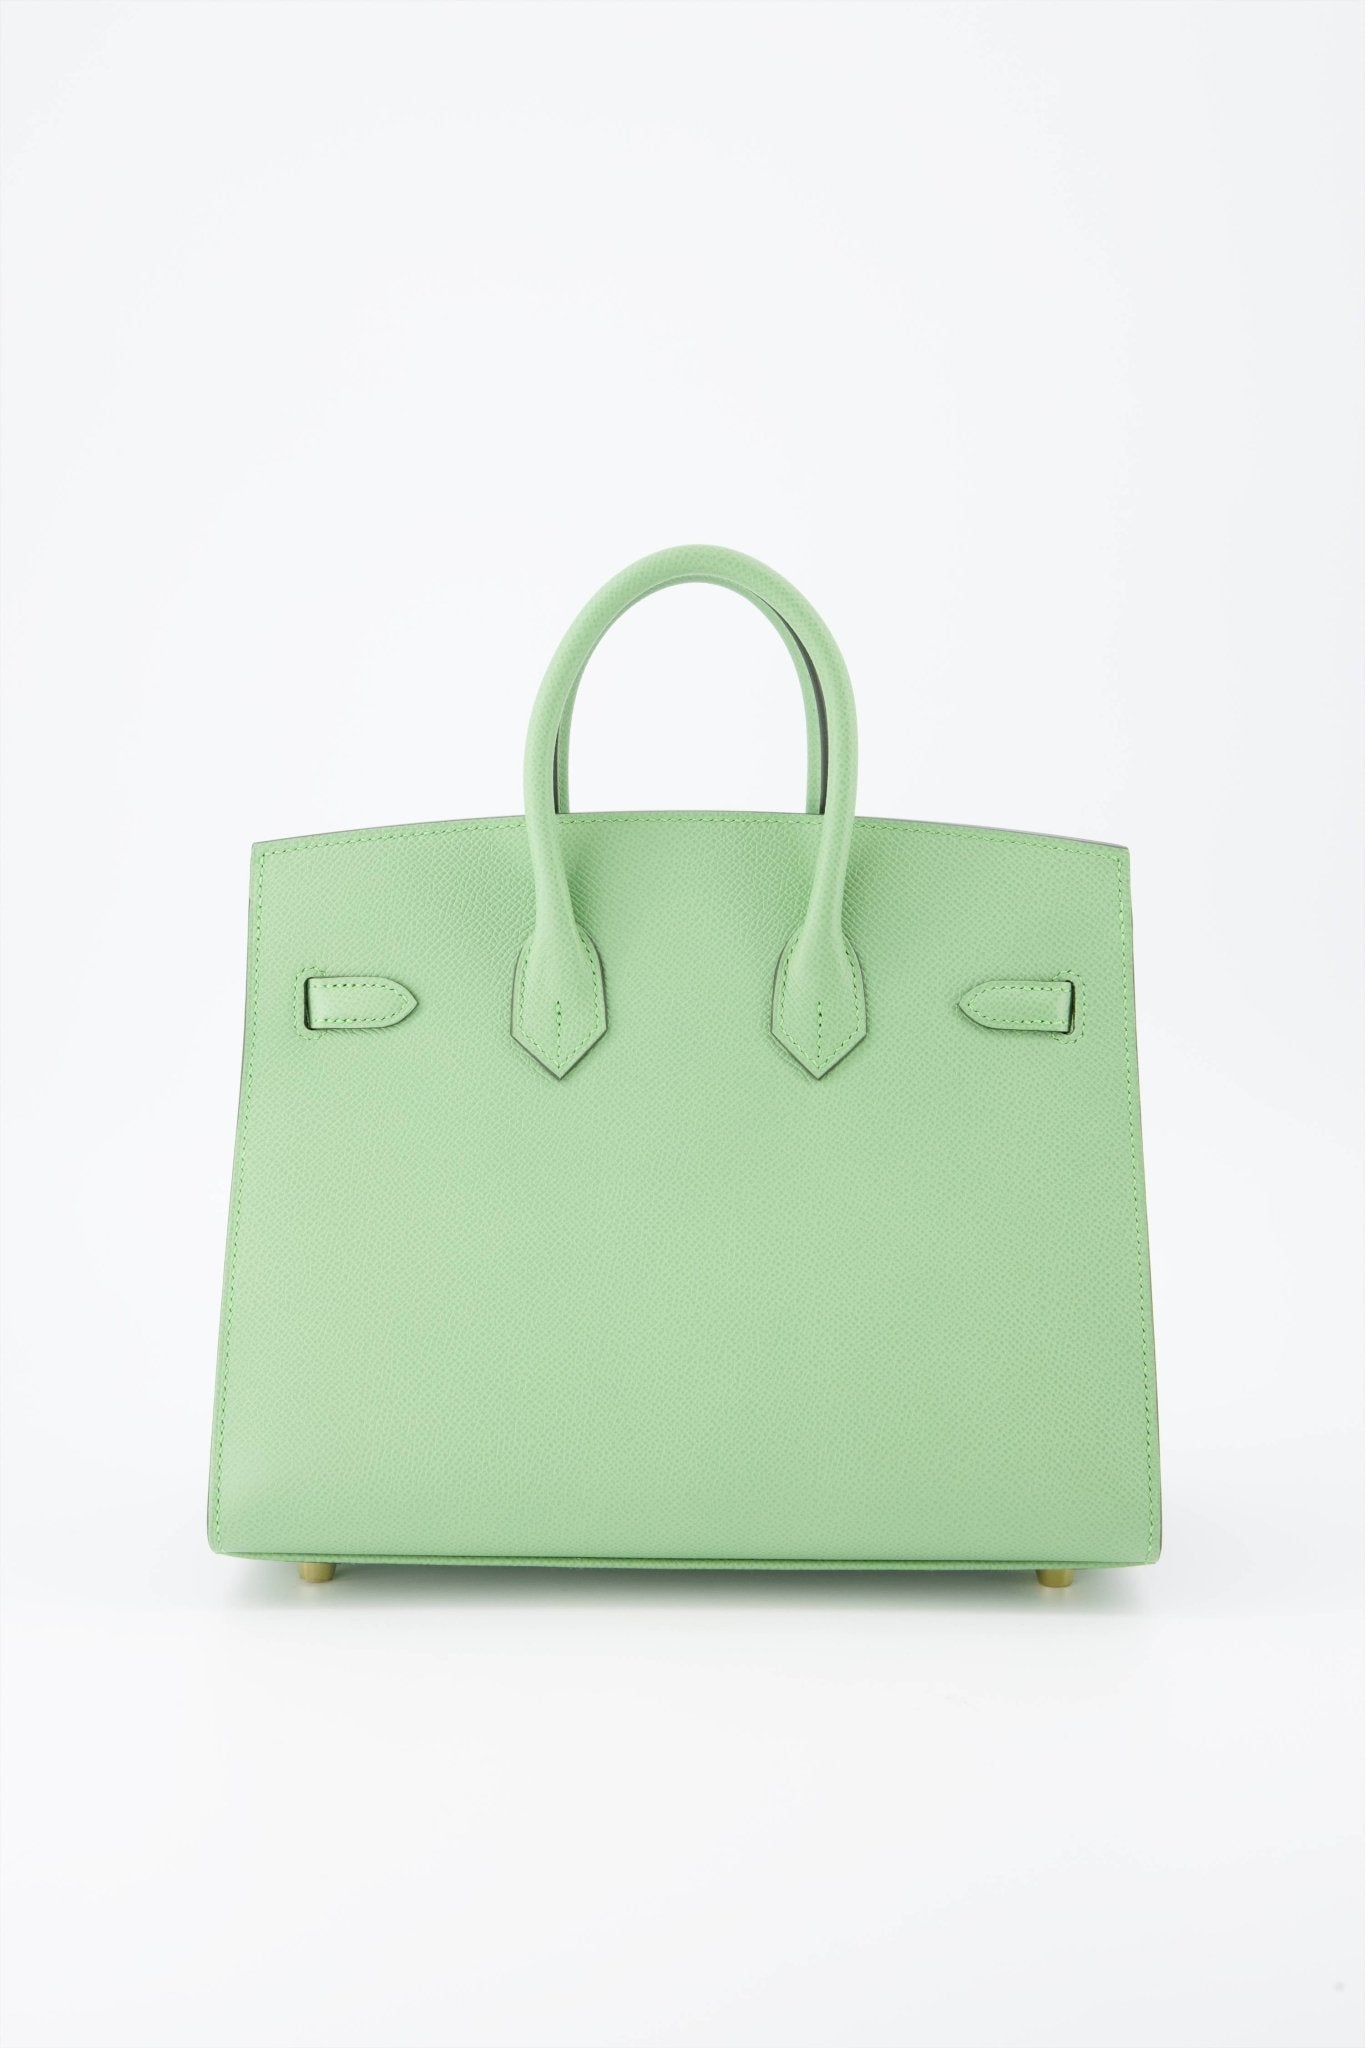 Hermes Kelly 25 Sellier Bag Vert Criquet Epsom Leather with Gold Hardw –  Mightychic